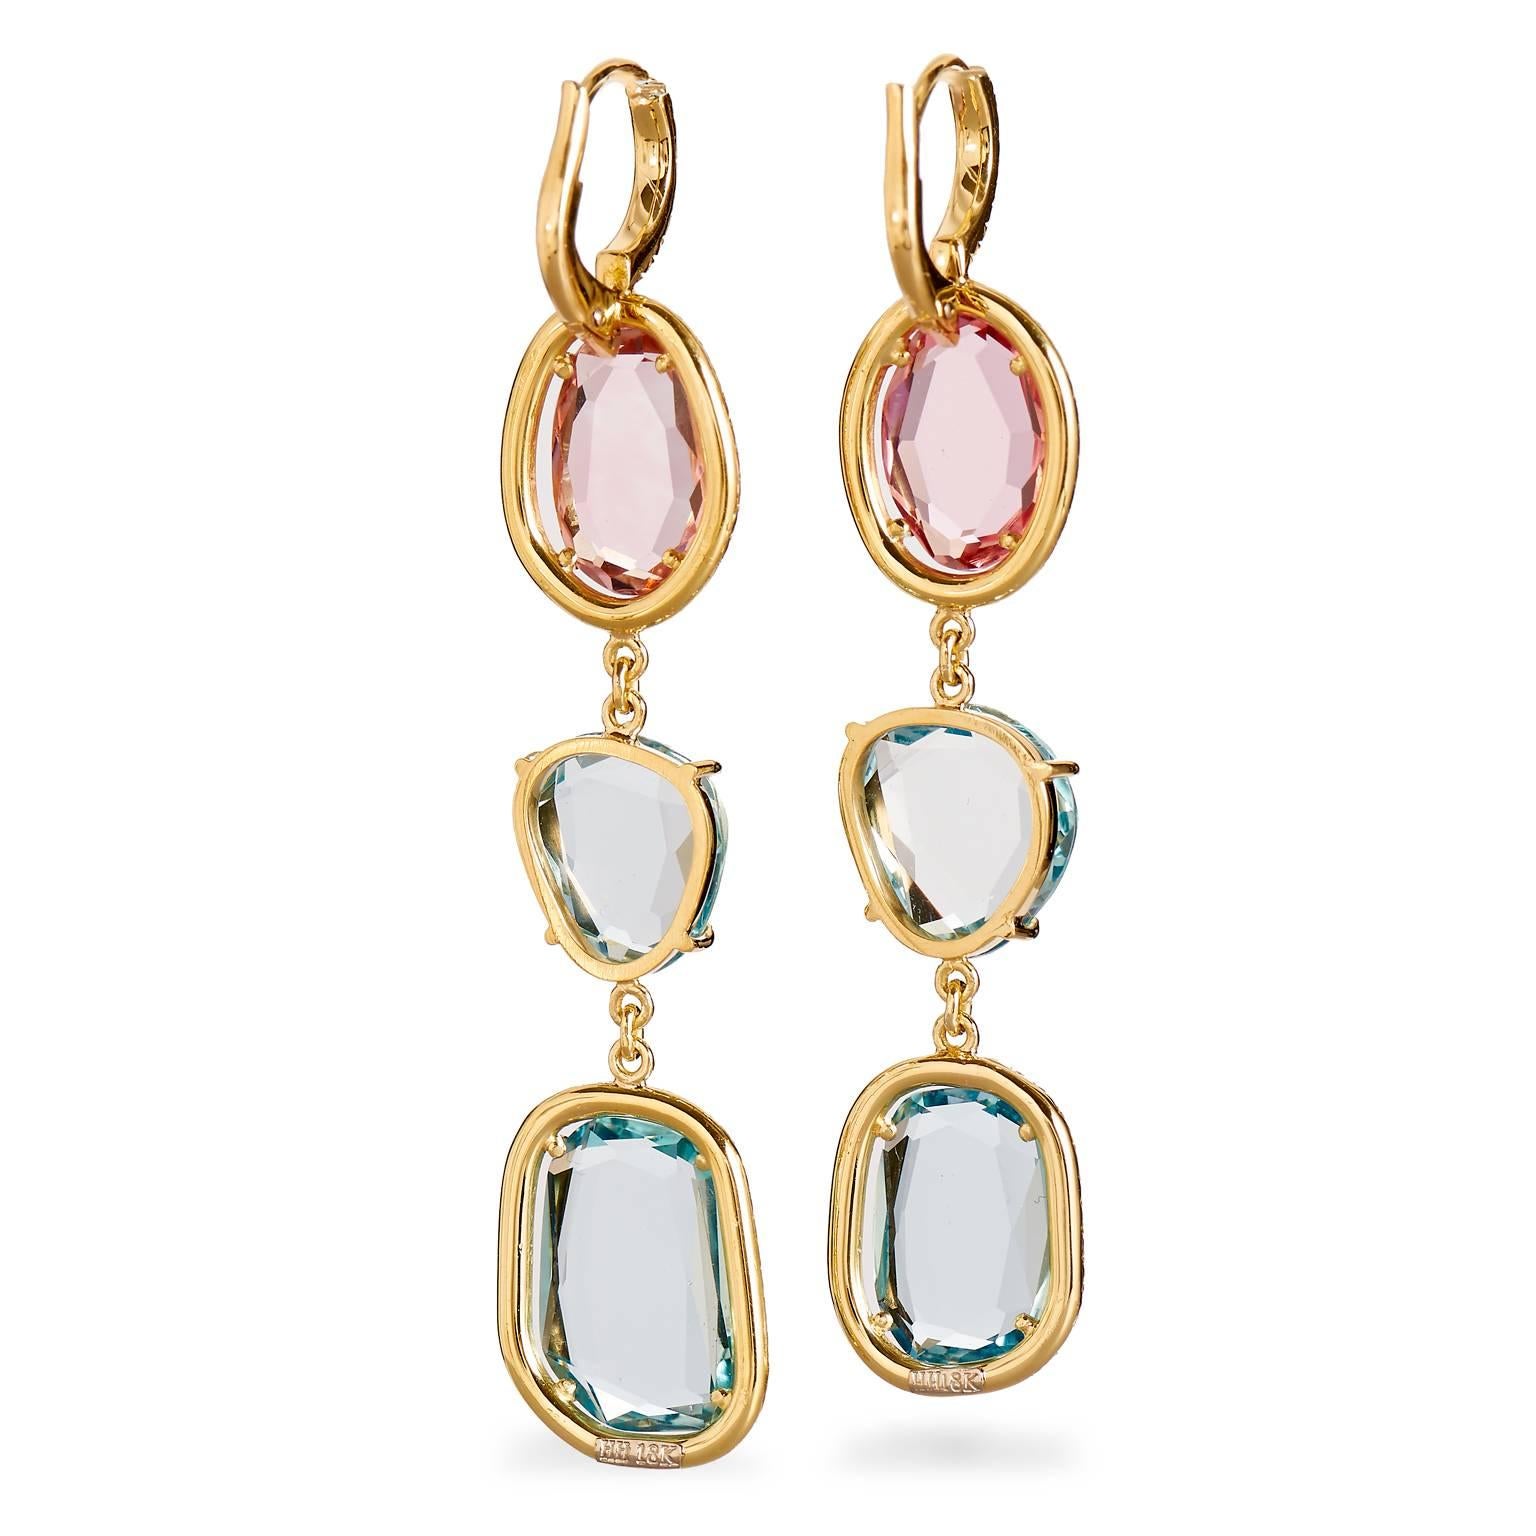 17.02 Carat Aquamarine Pink Tourmaline Slices Diamond Gold Drop Earrings

Handmade and one of a kind by H&H Jewels, these stunning earrings are created in 18 karat yellow gold.  This set of drop earrings displays a divine fluid and feminine design.